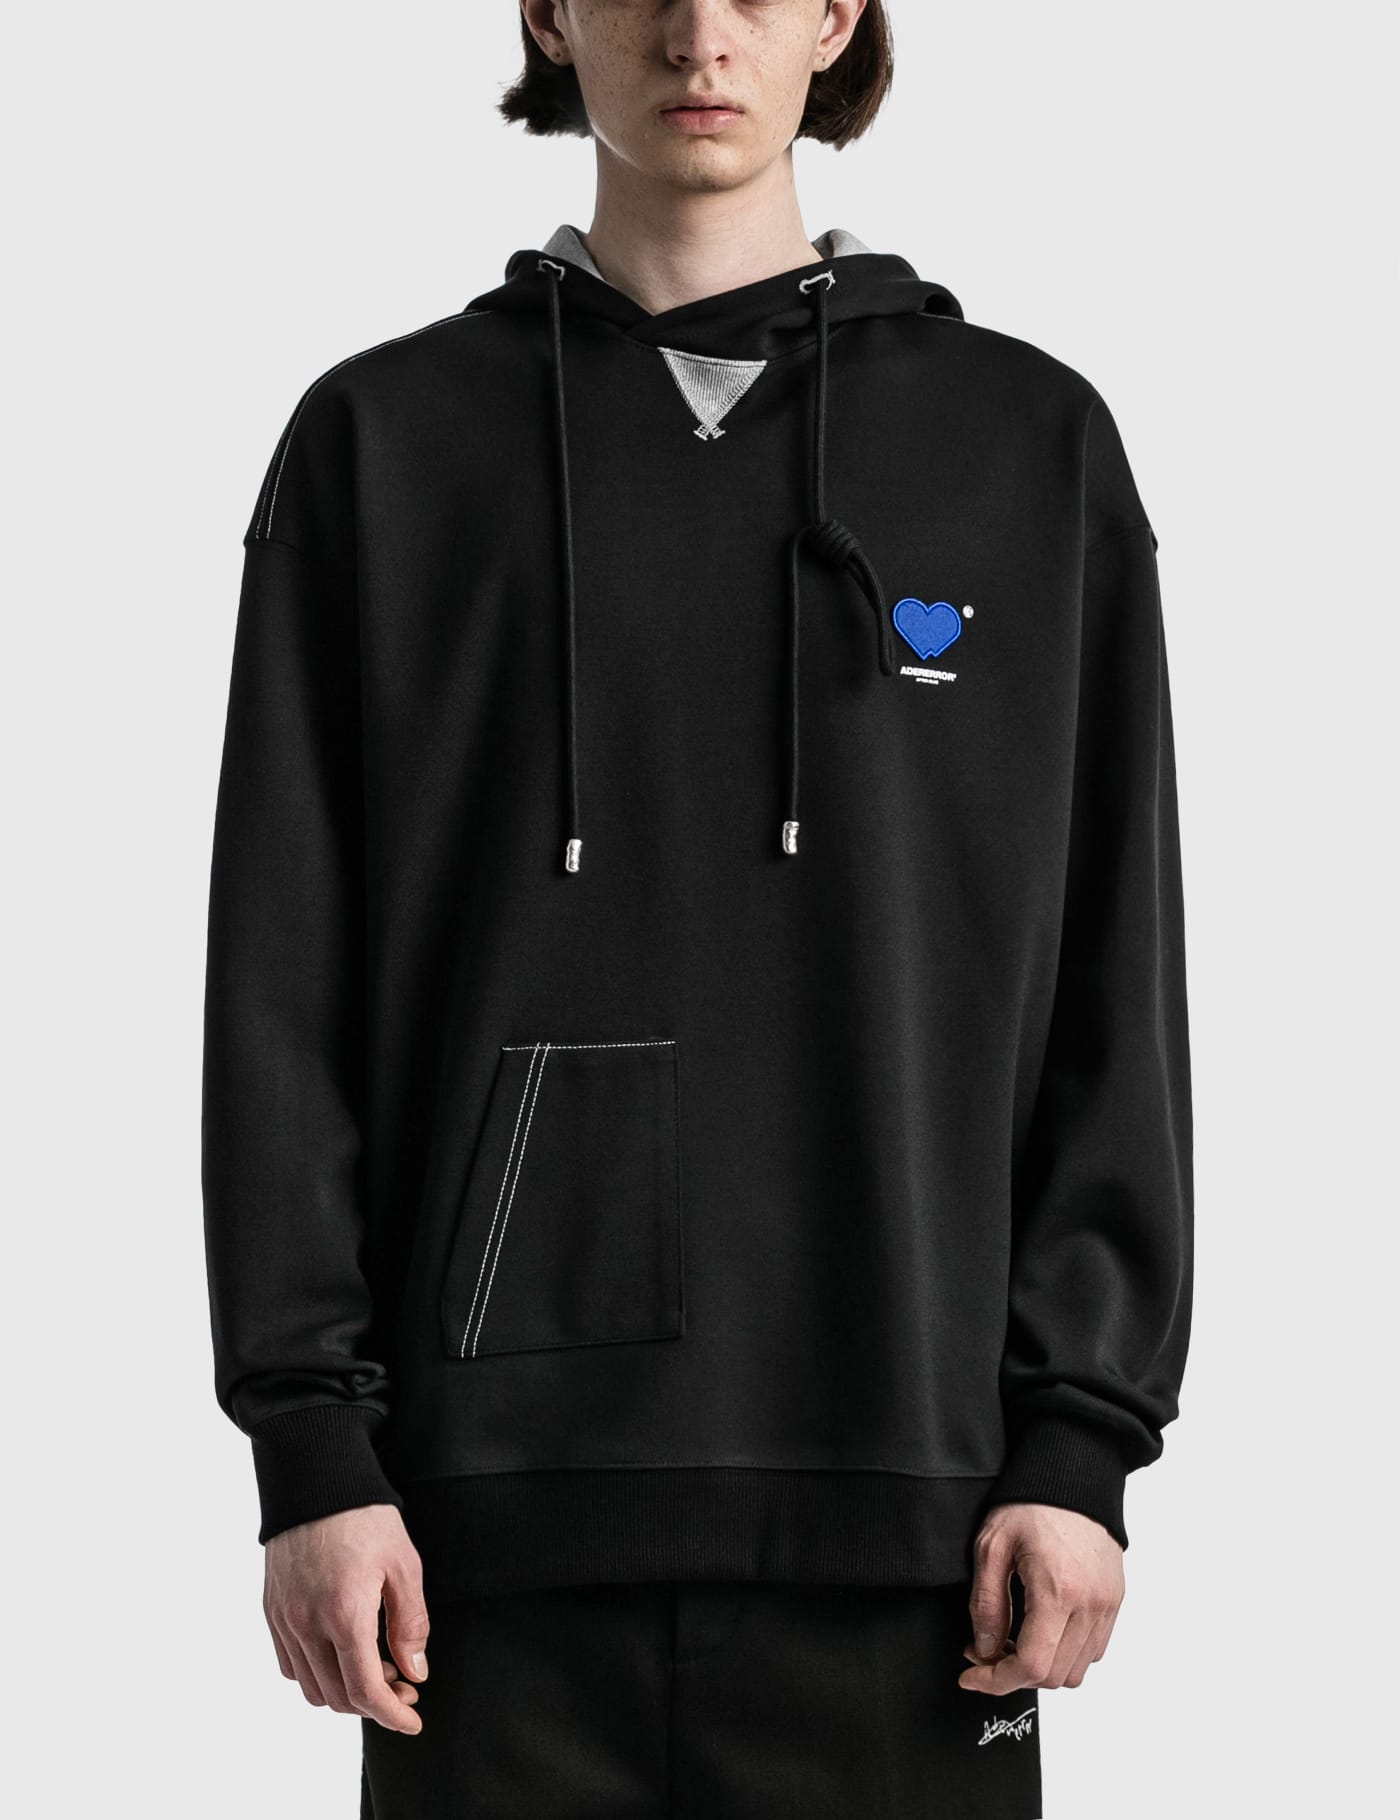 Ader Error - Twin Heart Hoodie | HBX - Globally Curated Fashion 